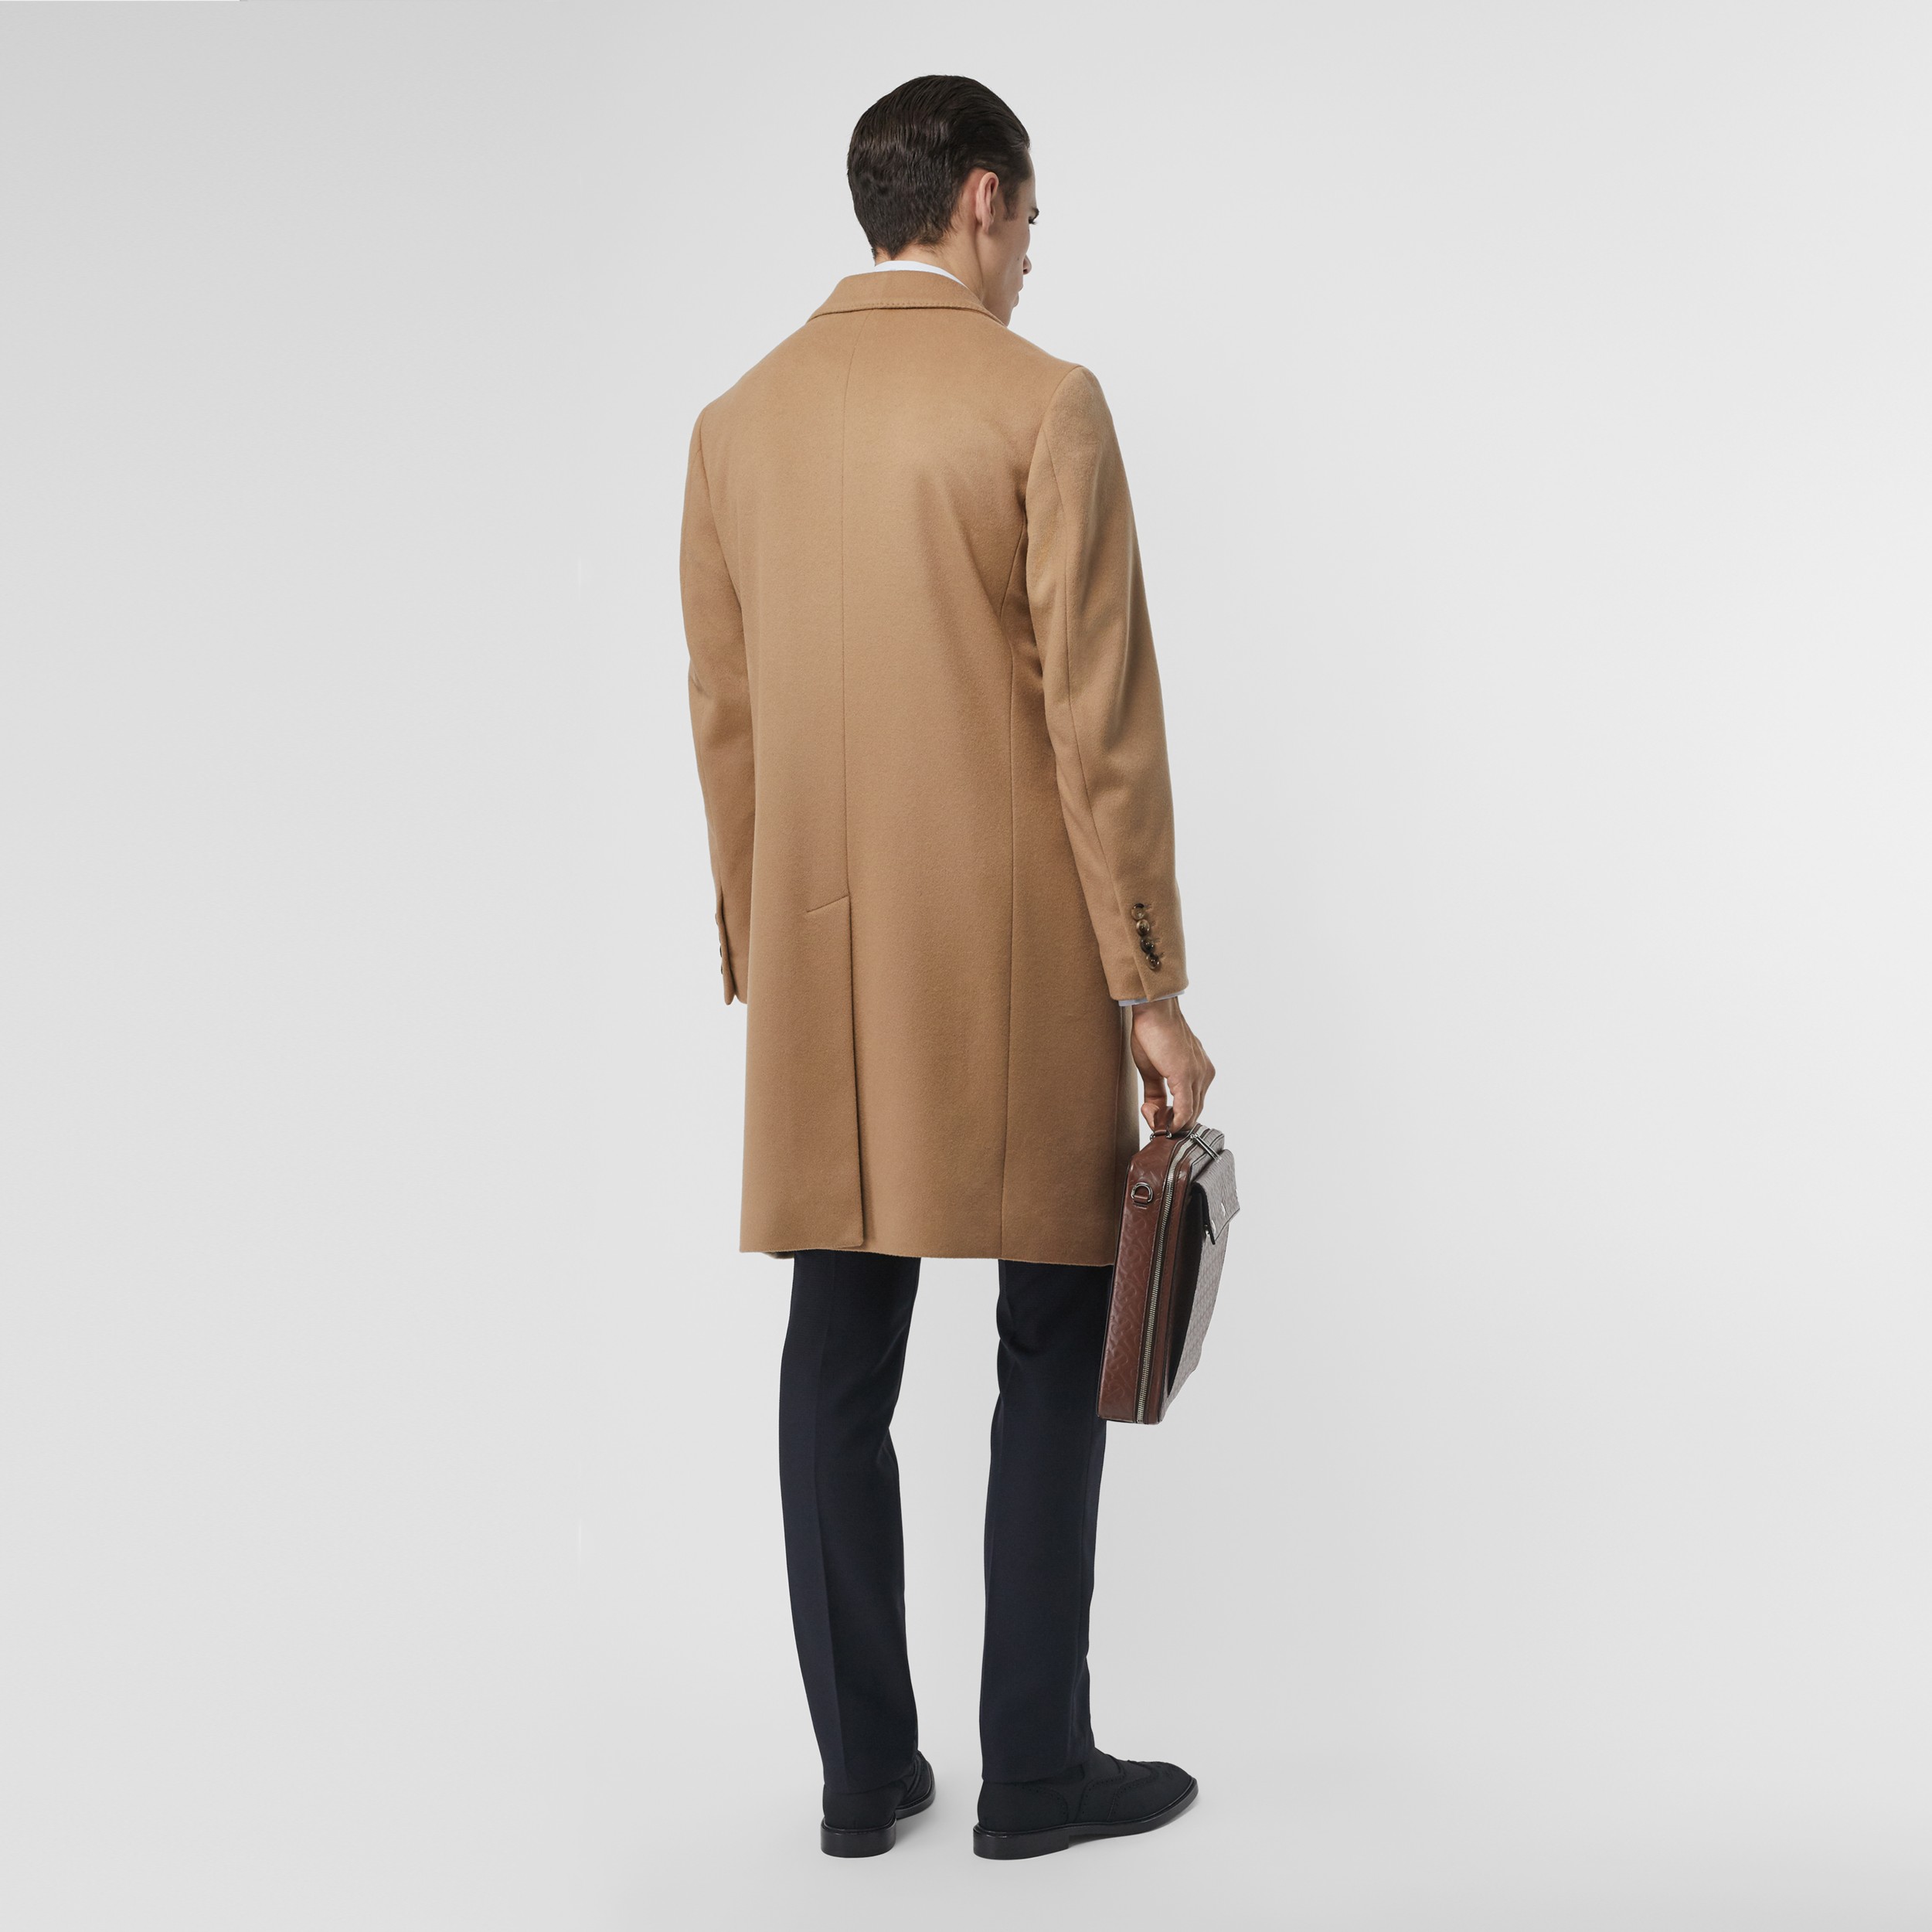 Wool Cashmere Tailored Coat in Camel - Men | Burberry United States